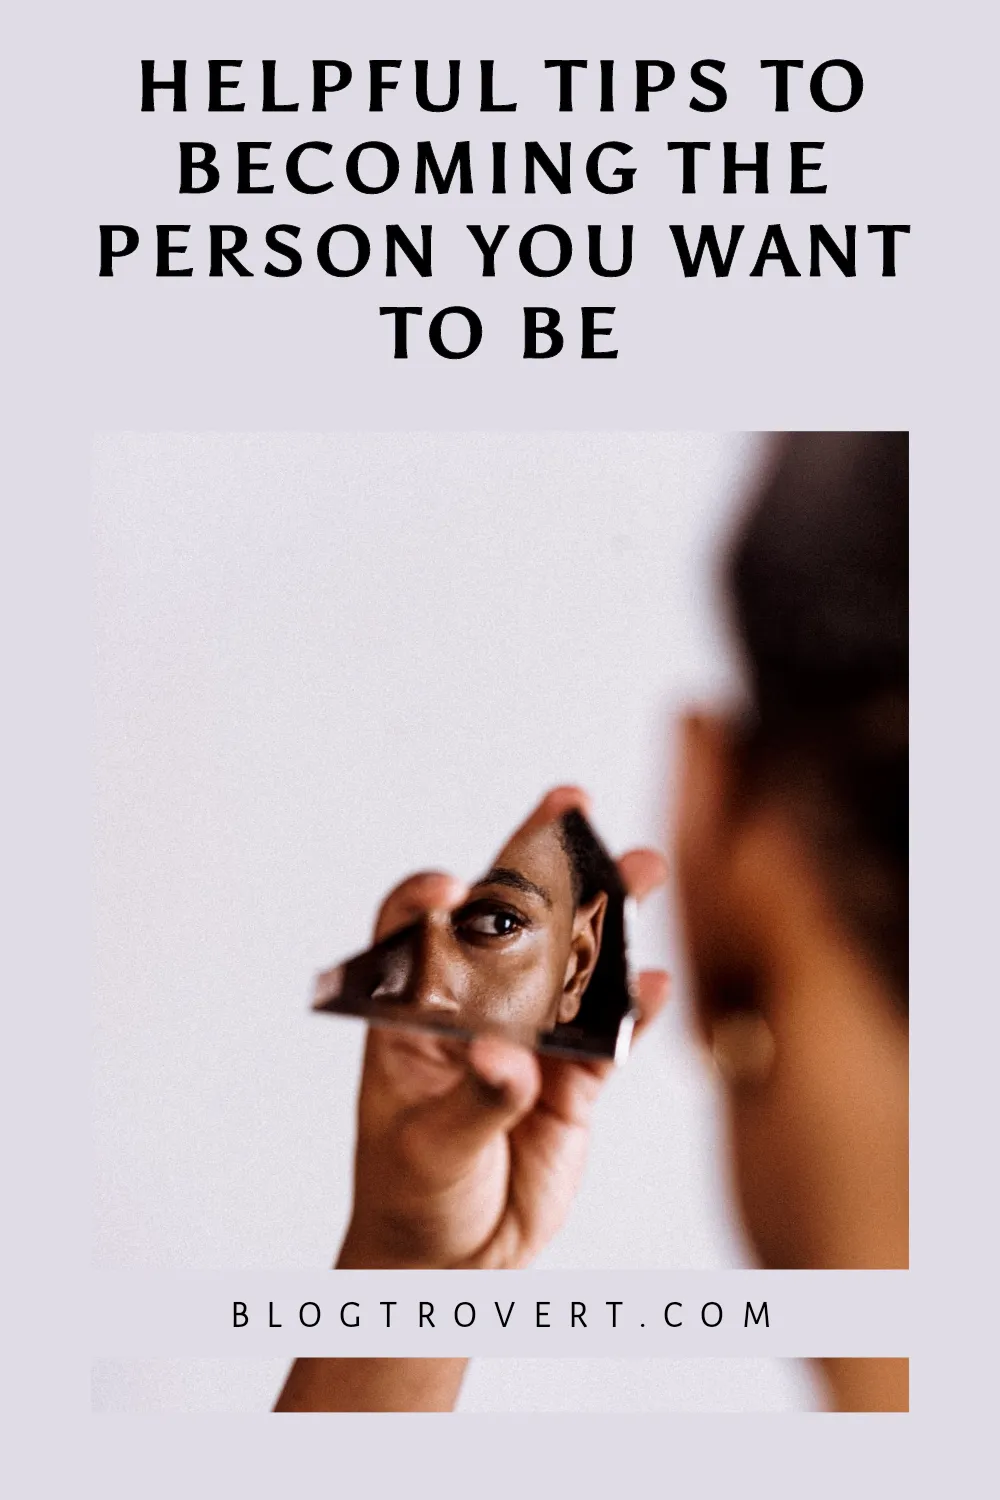 How to become the person you want to be - 17 helpful tips 3